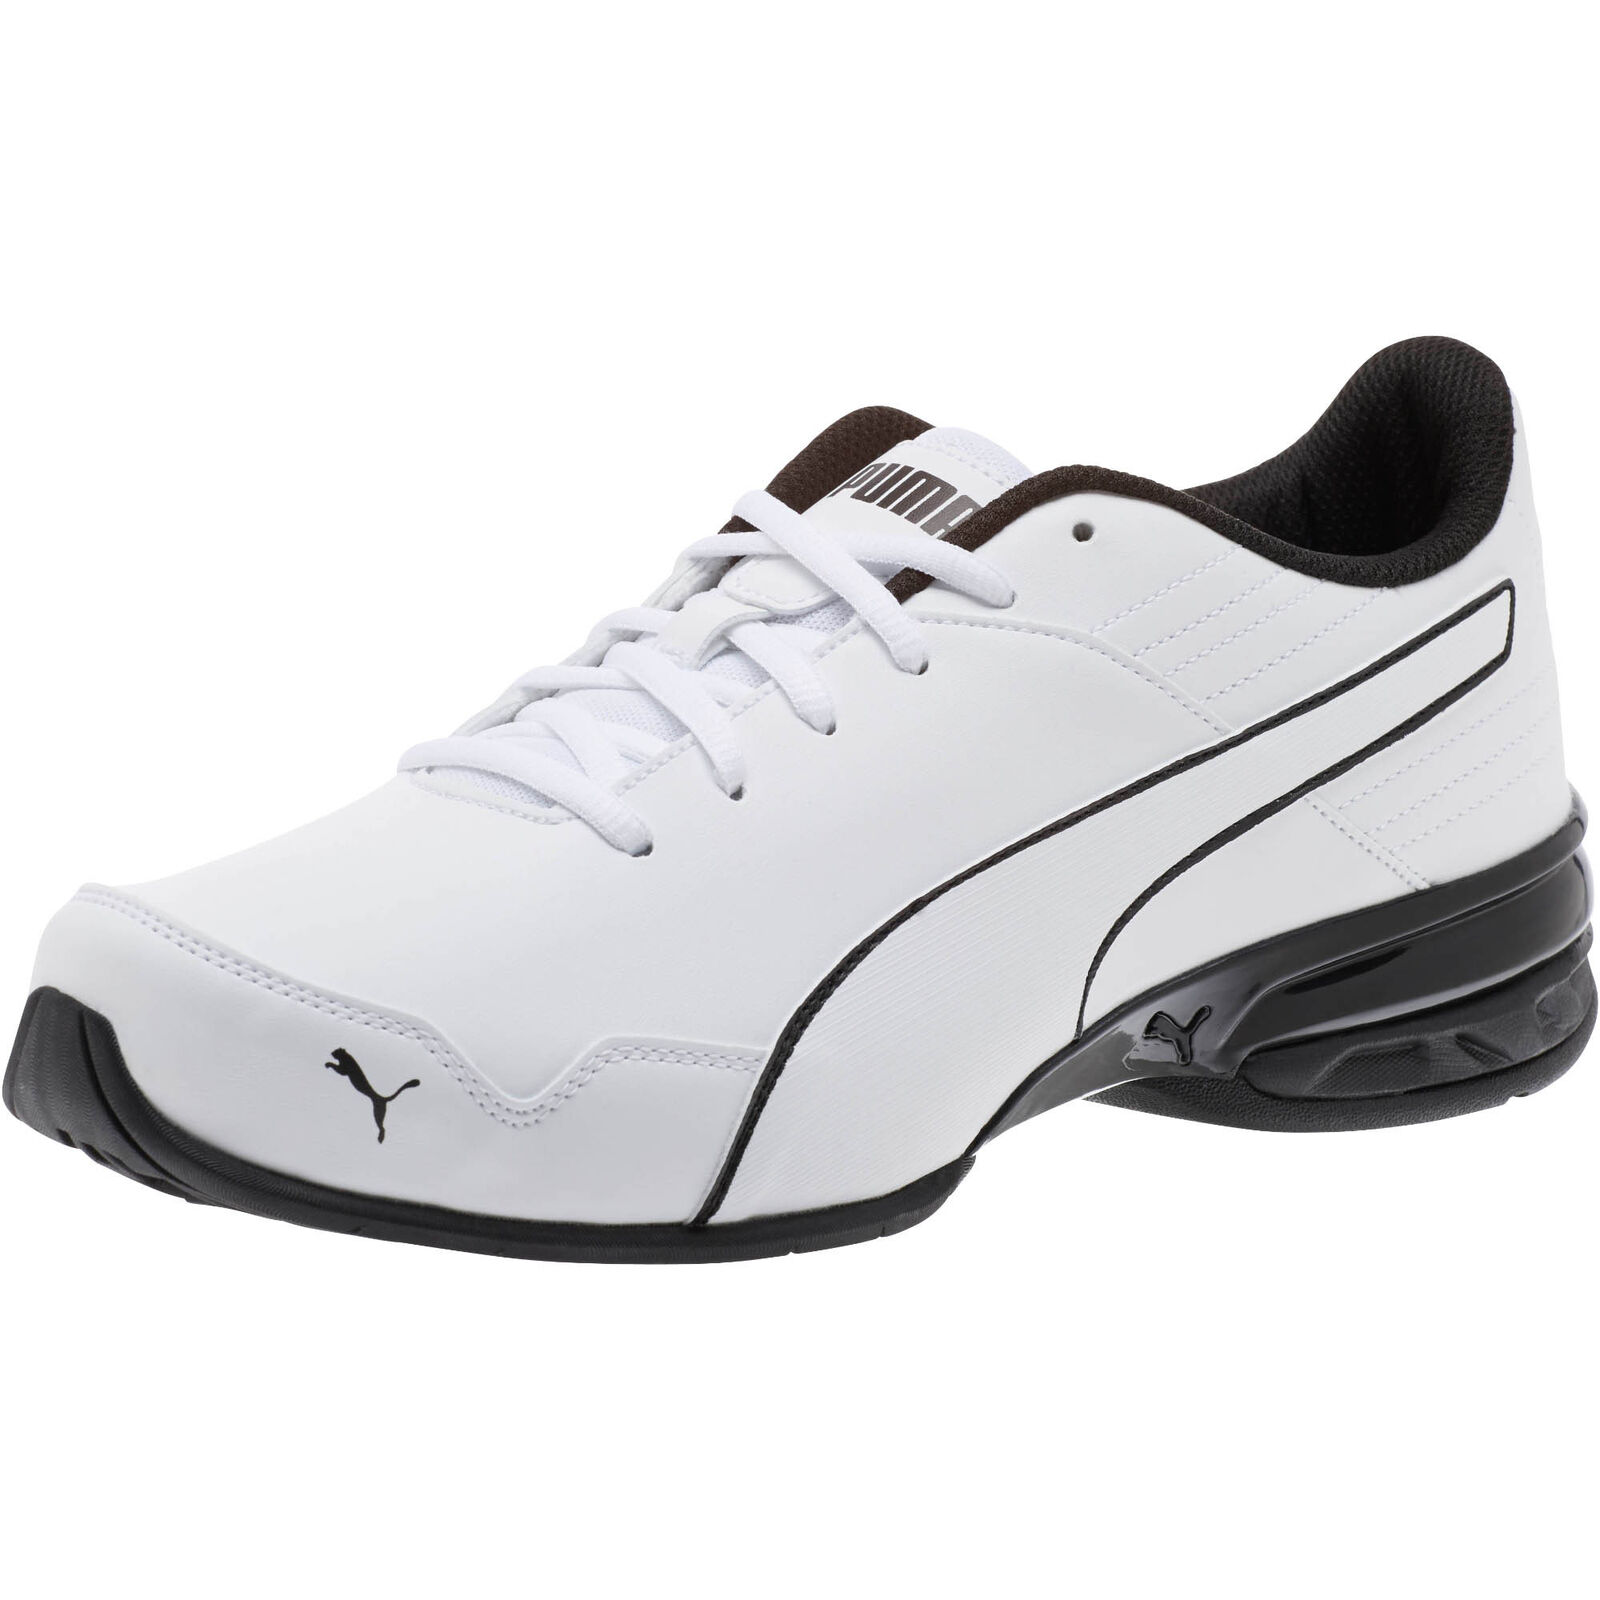 Puma men's Super Levitate running shoes for $28, free shipping - Clark ...